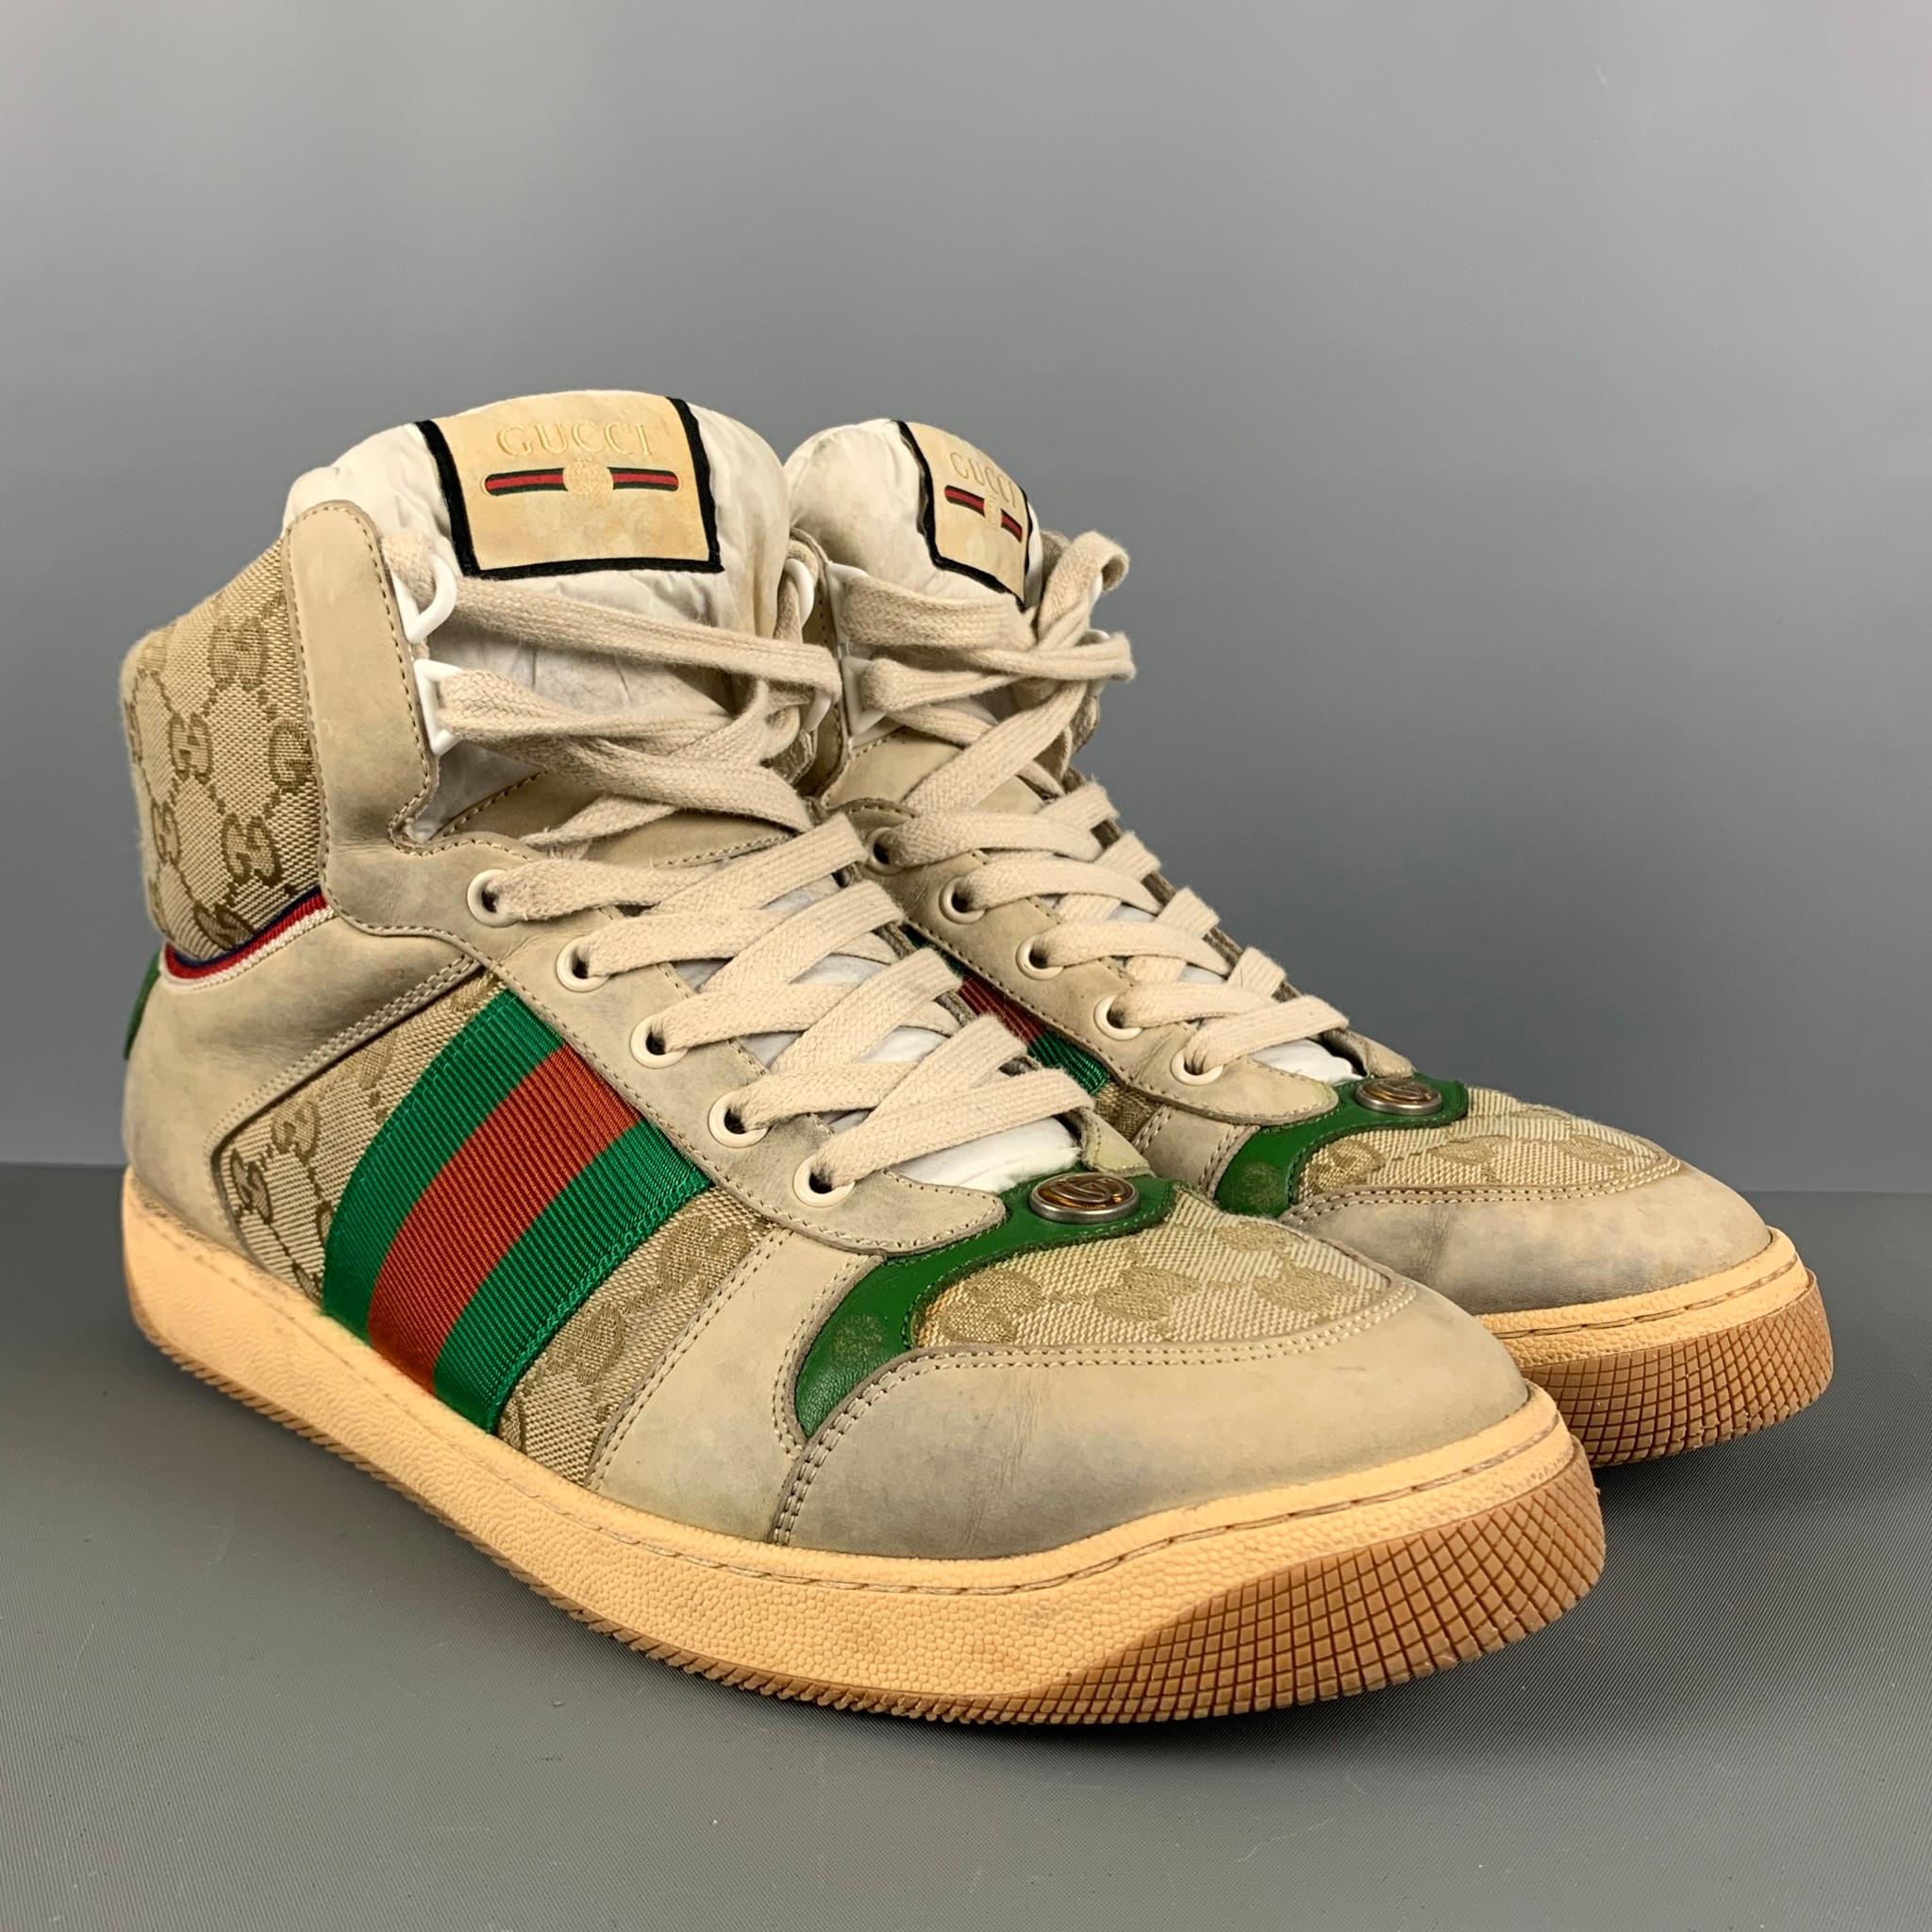 GUCCI Screener high top sneakers comes in a green and red distressed canvas featuring a chunky style, GG printed logo, rubber sole, and a lace up style. Made in Italy.

Very Good Pre-Owned Condition. Light wear. As-is.
Marked: